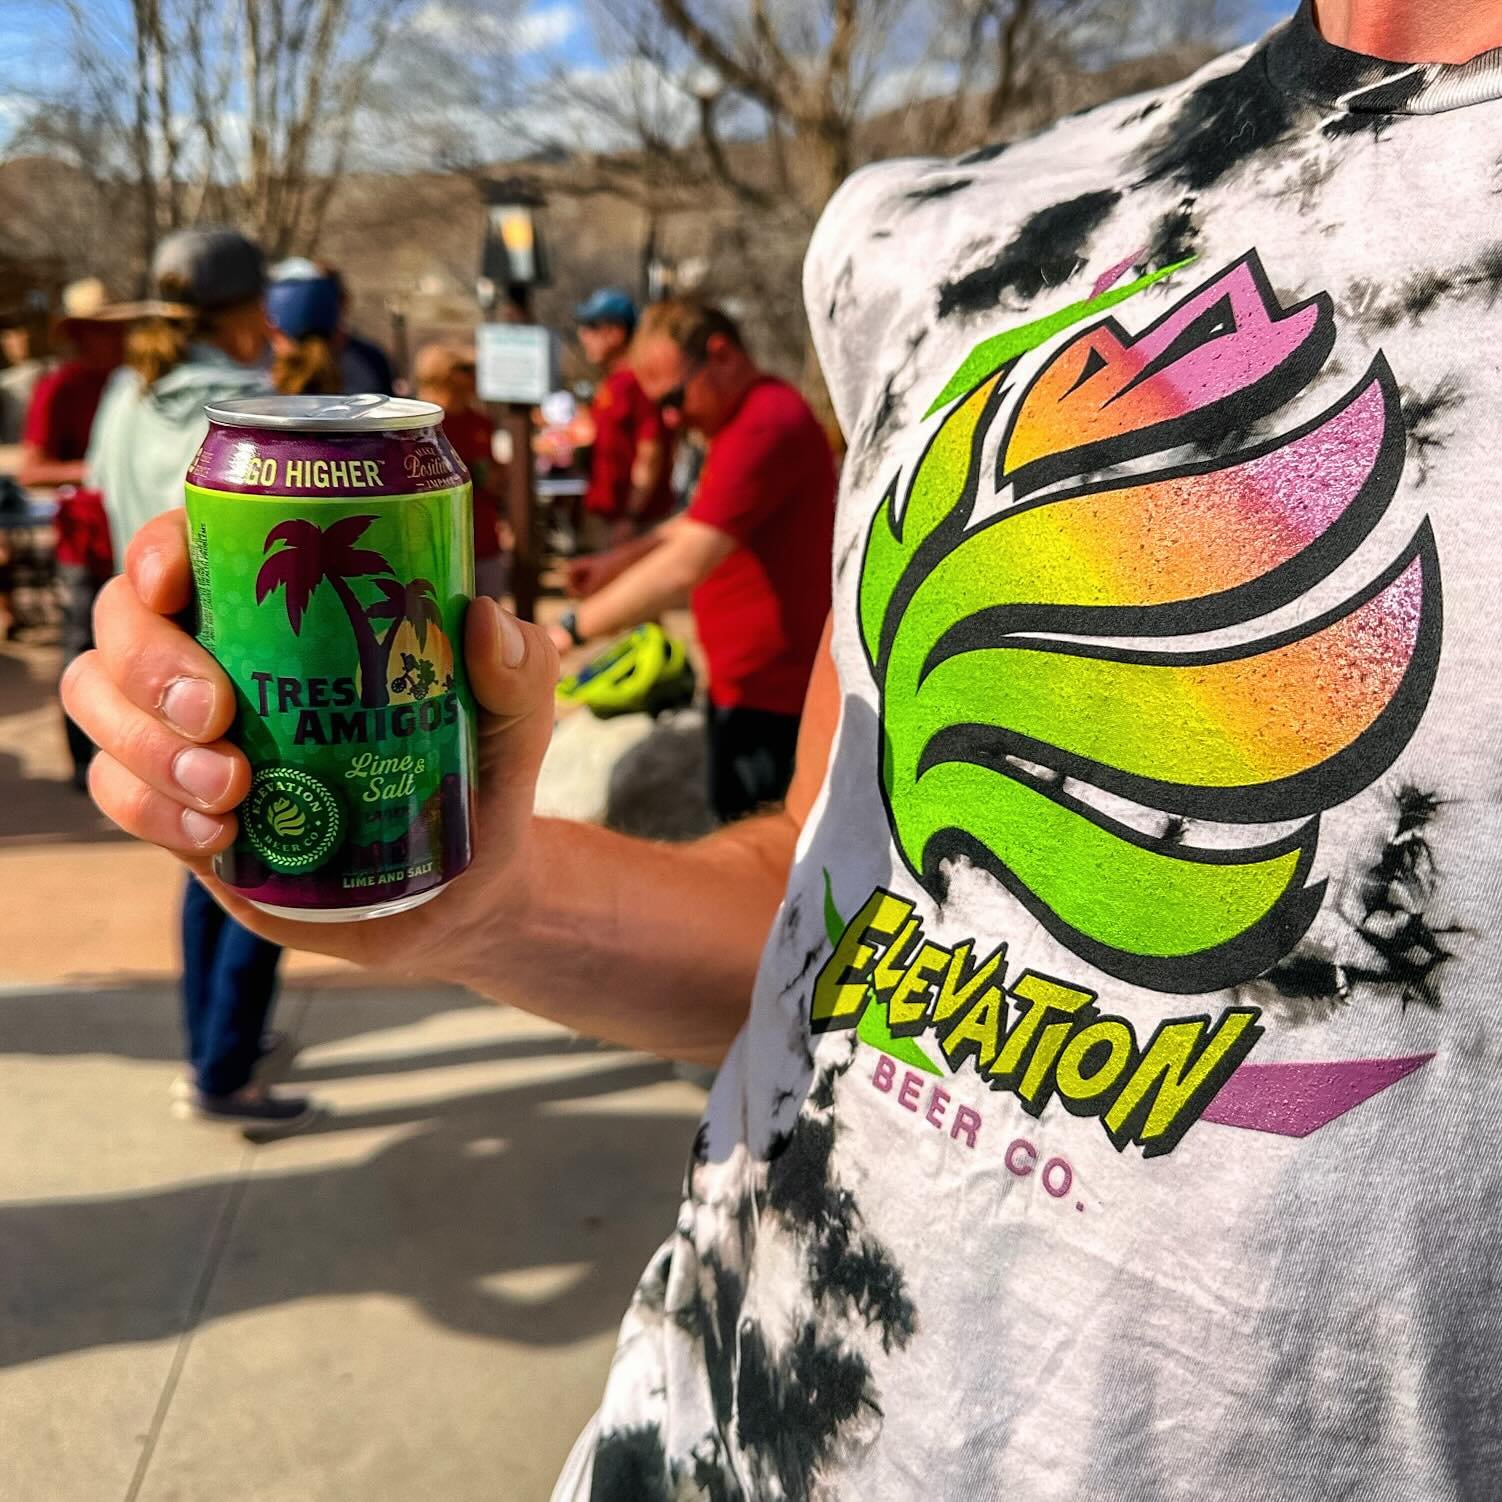 Cheers to everyone participating in the @salida_enduro this month. You&rsquo;re all crushin&rsquo; it! 🍻